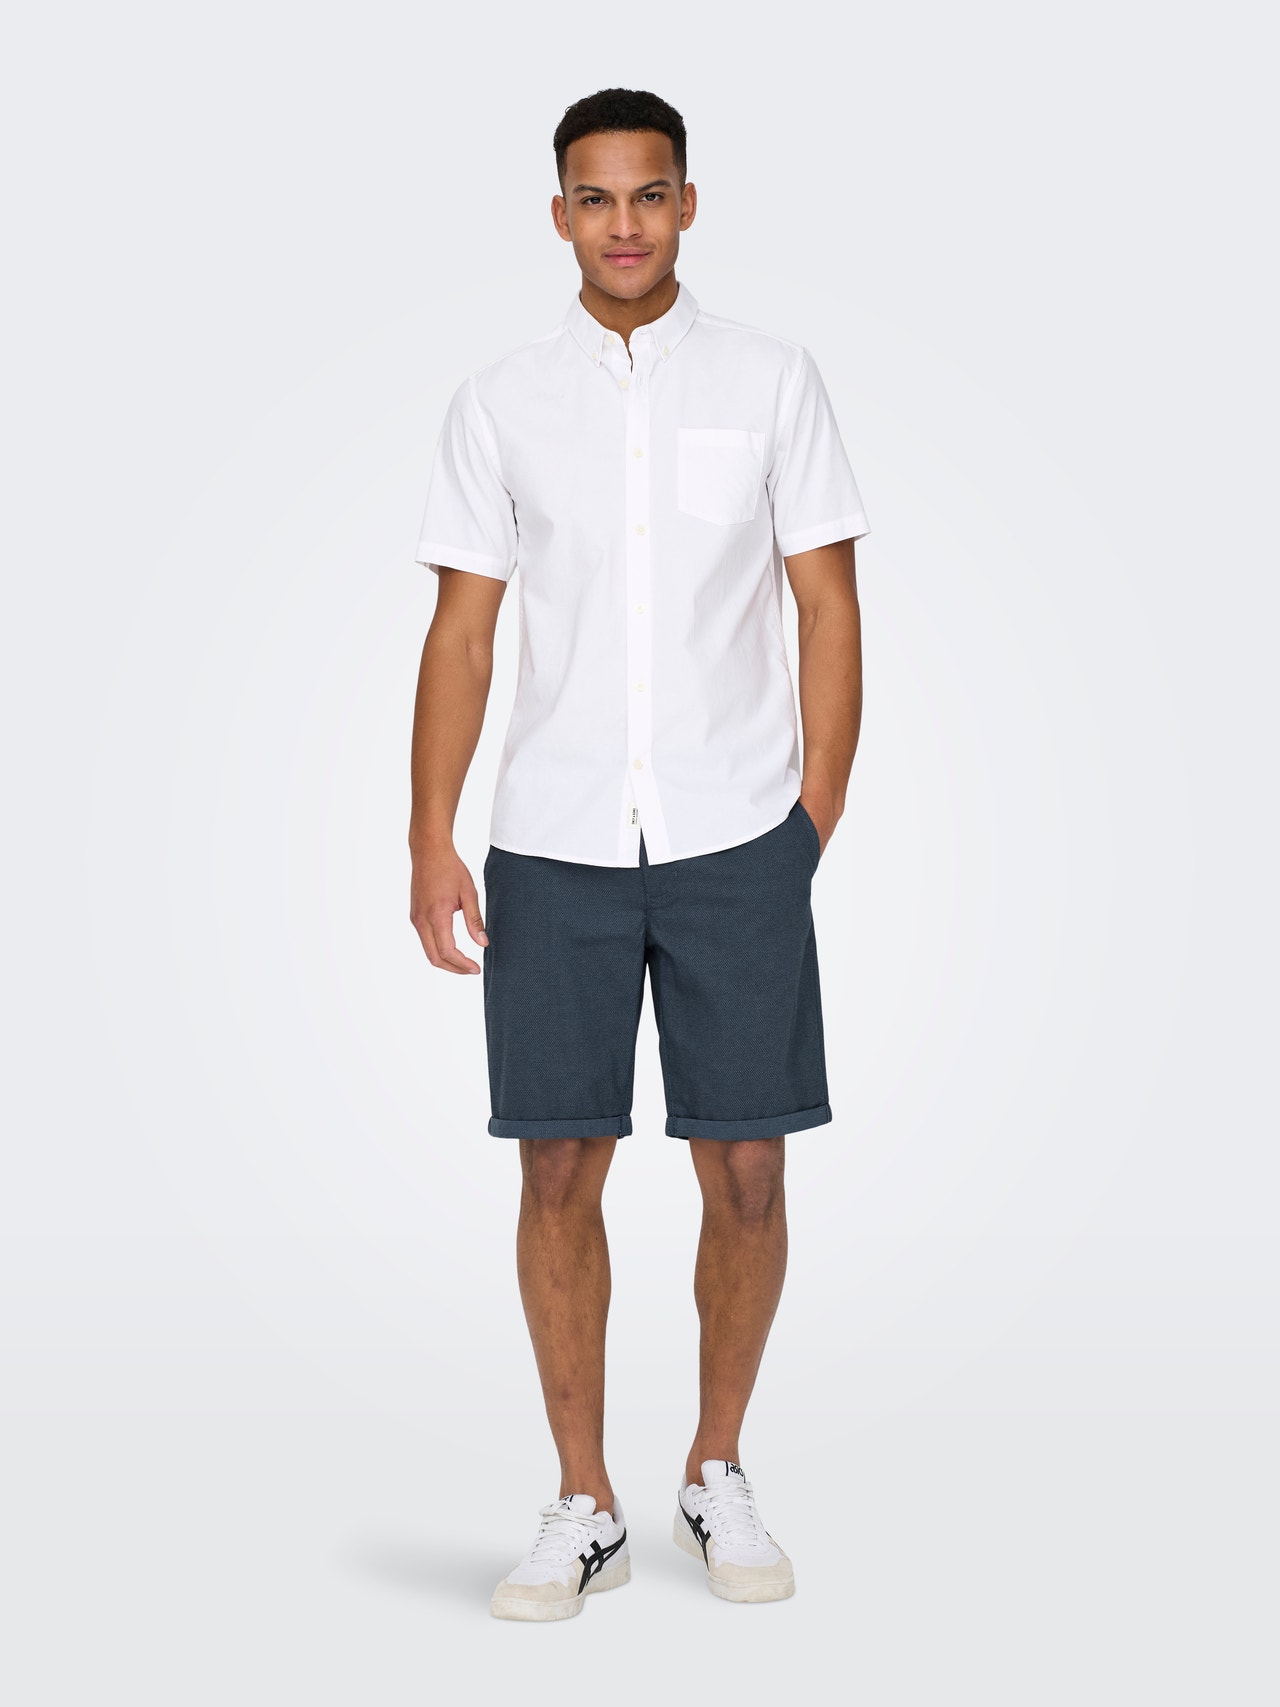 ONLY & SONS Shorts Regular Fit -Bering Sea - 22028336